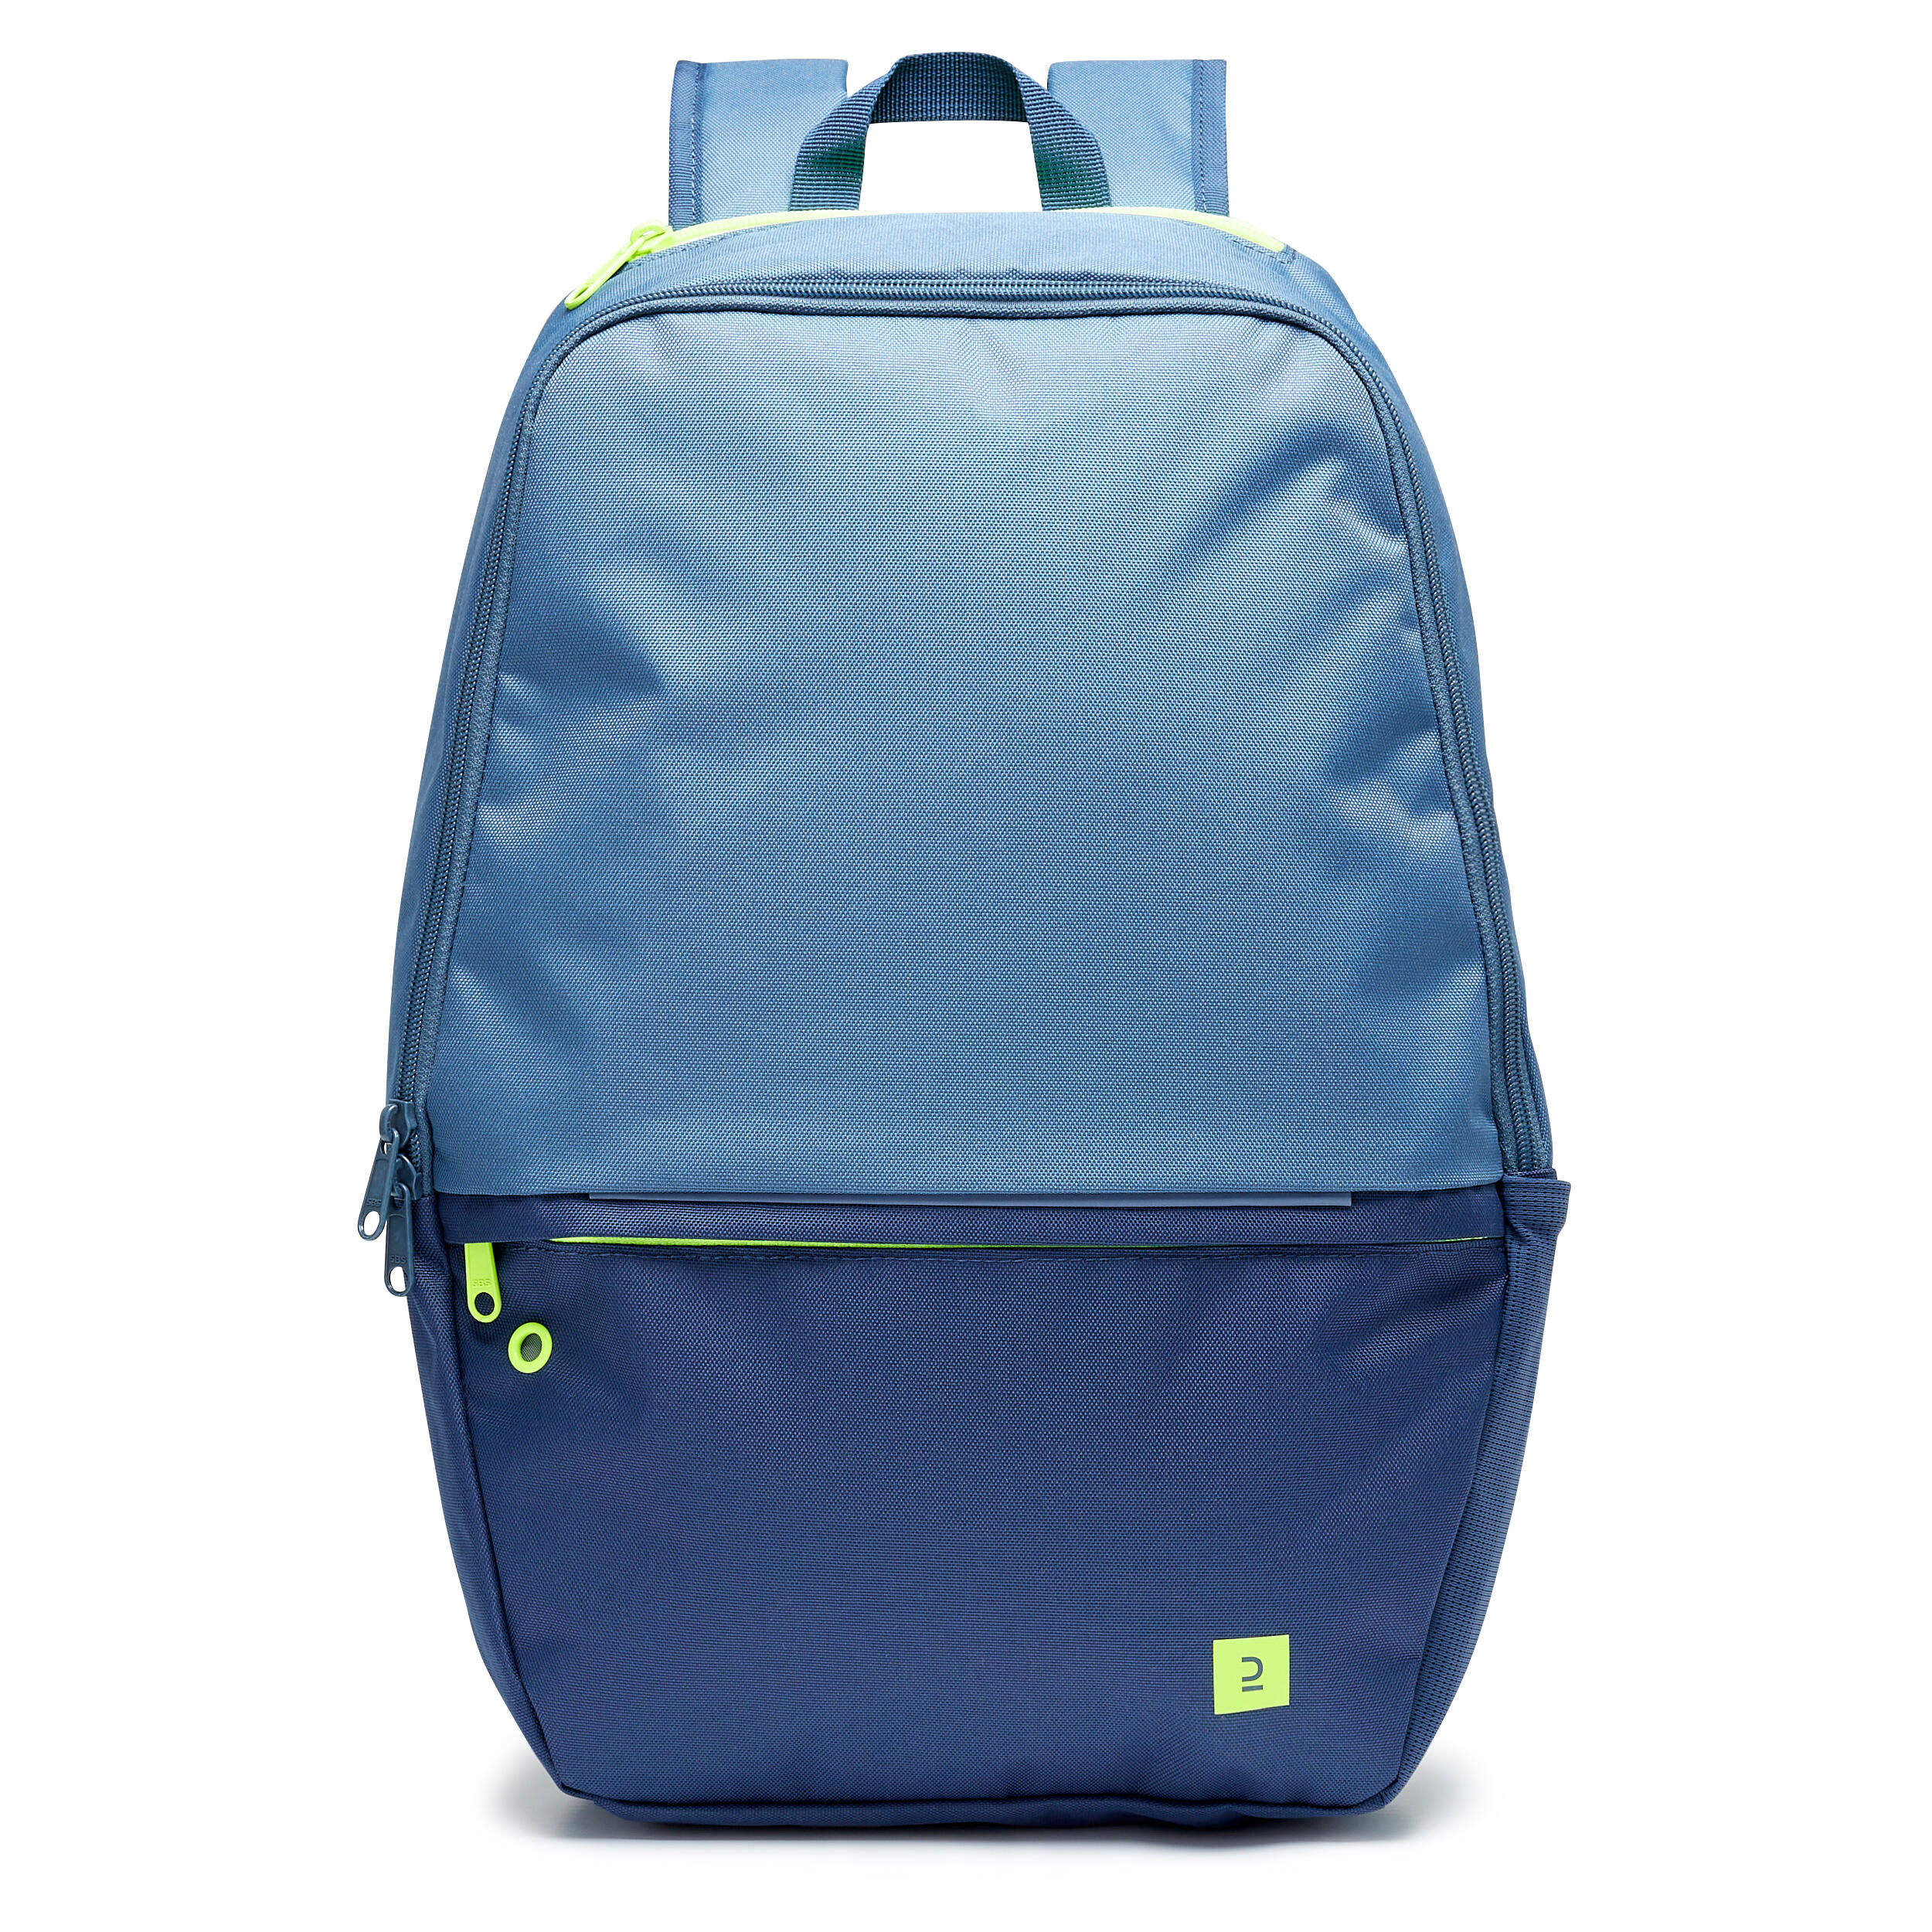 Essential Backpack - 17 L Blue - Storm Blue, Grey, Fluo lime yellow ...